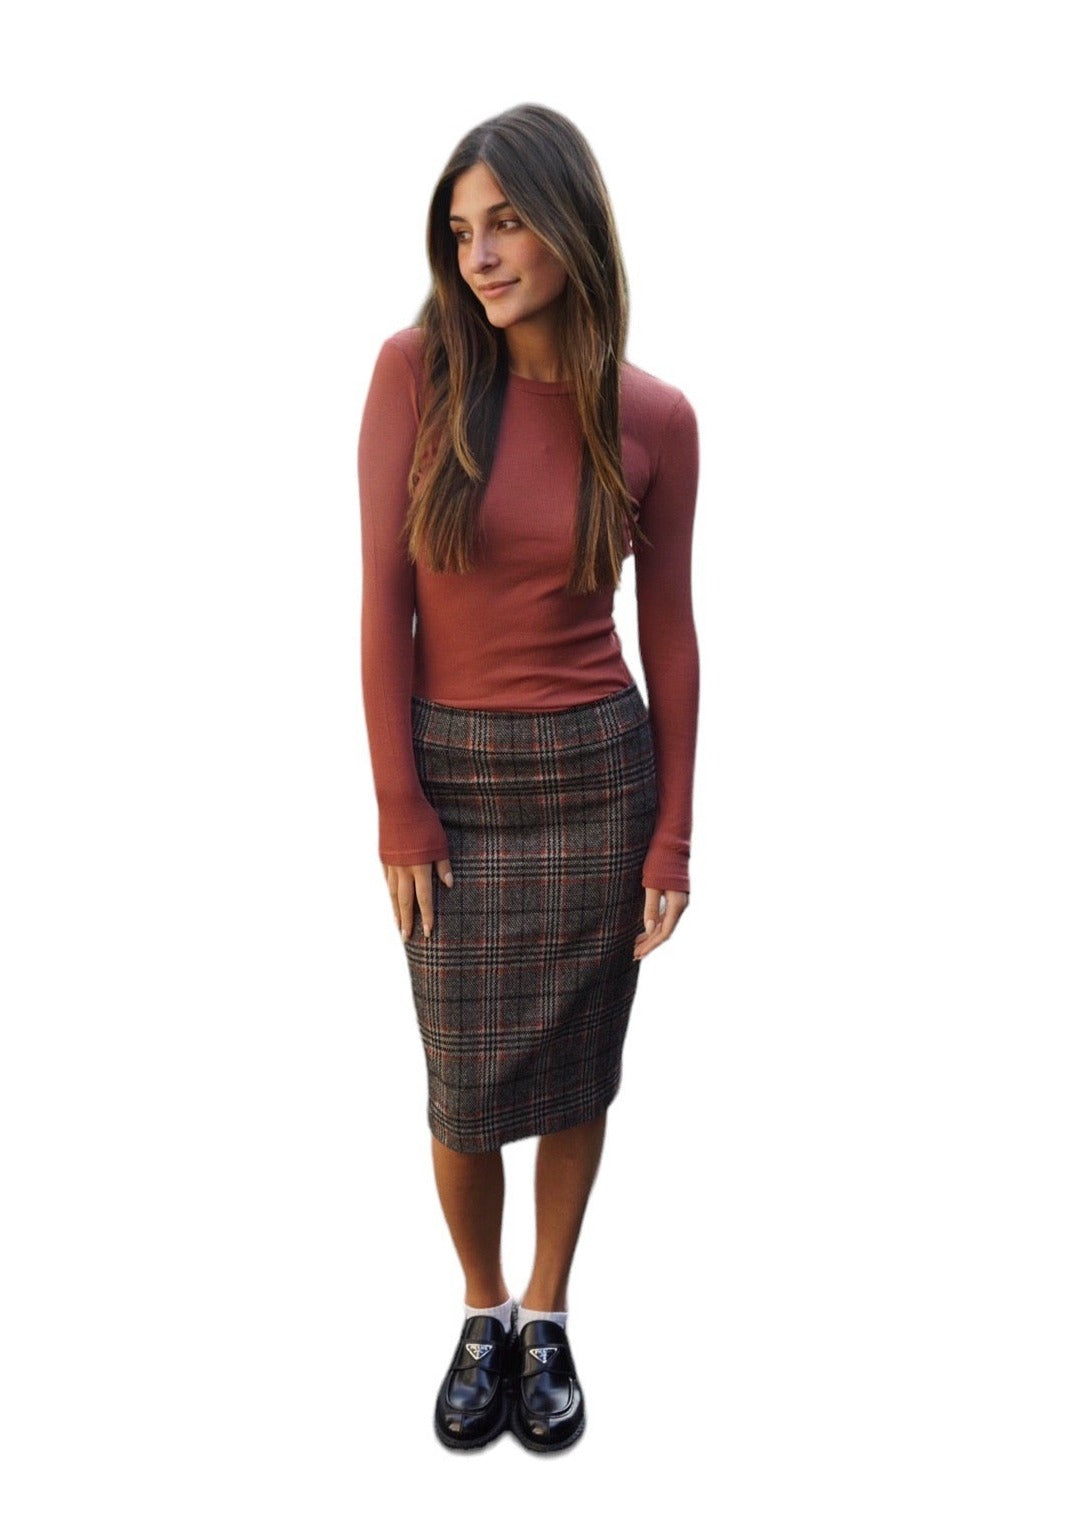 Avenue Montaigne Pull-On skirt